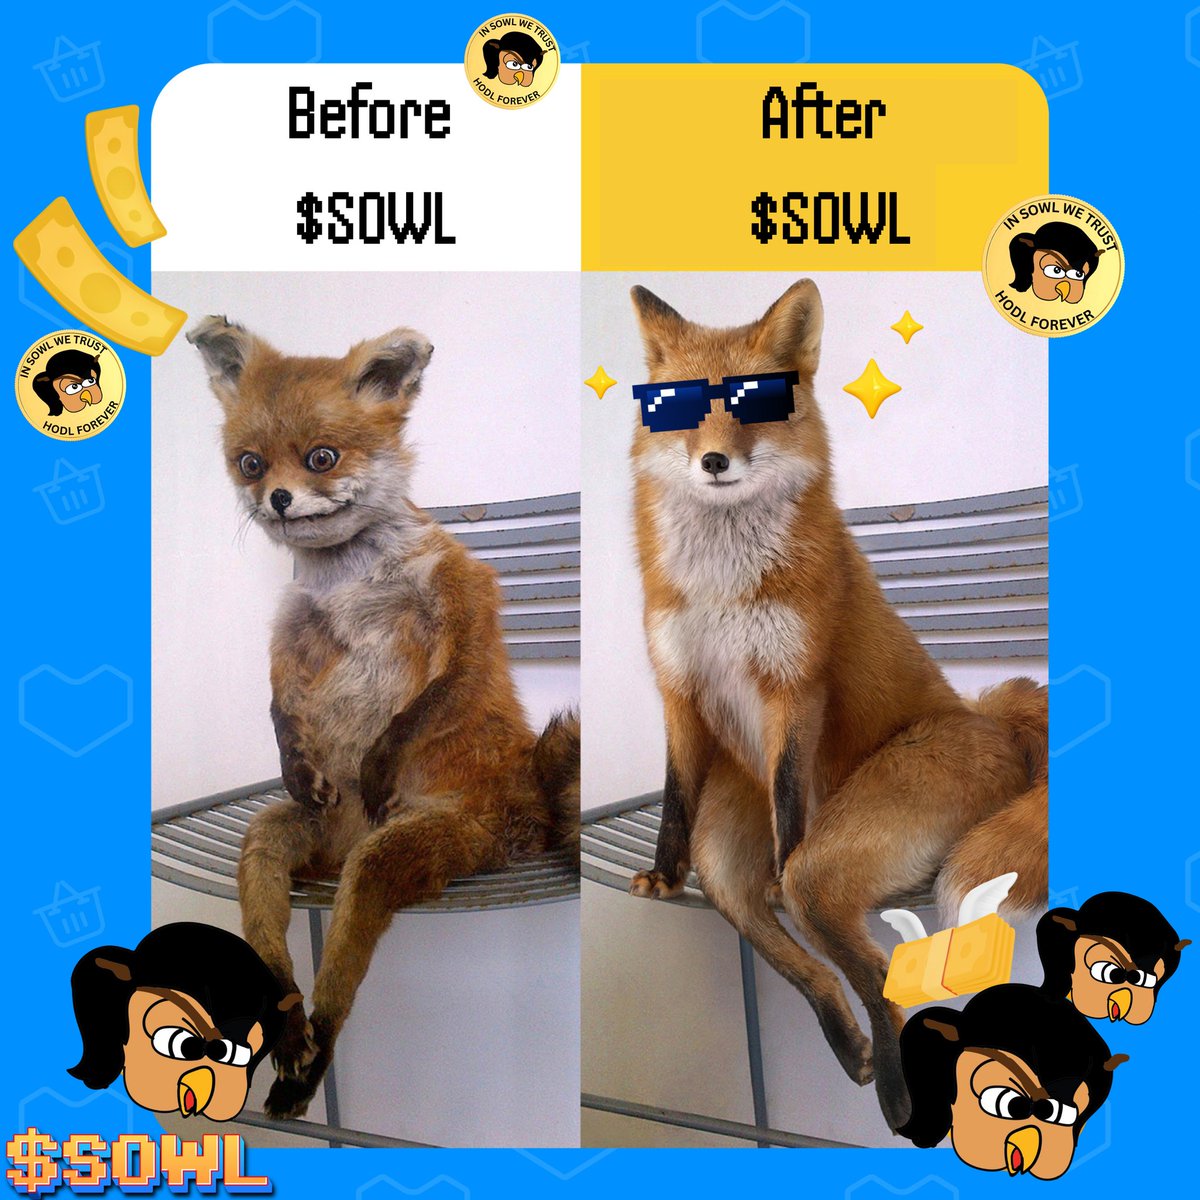 So now you already know who we are, $SOWL - Sowlana! 💪🏻😎💎

#MemeCoinSeason #memecoin #Memes #dankmemes